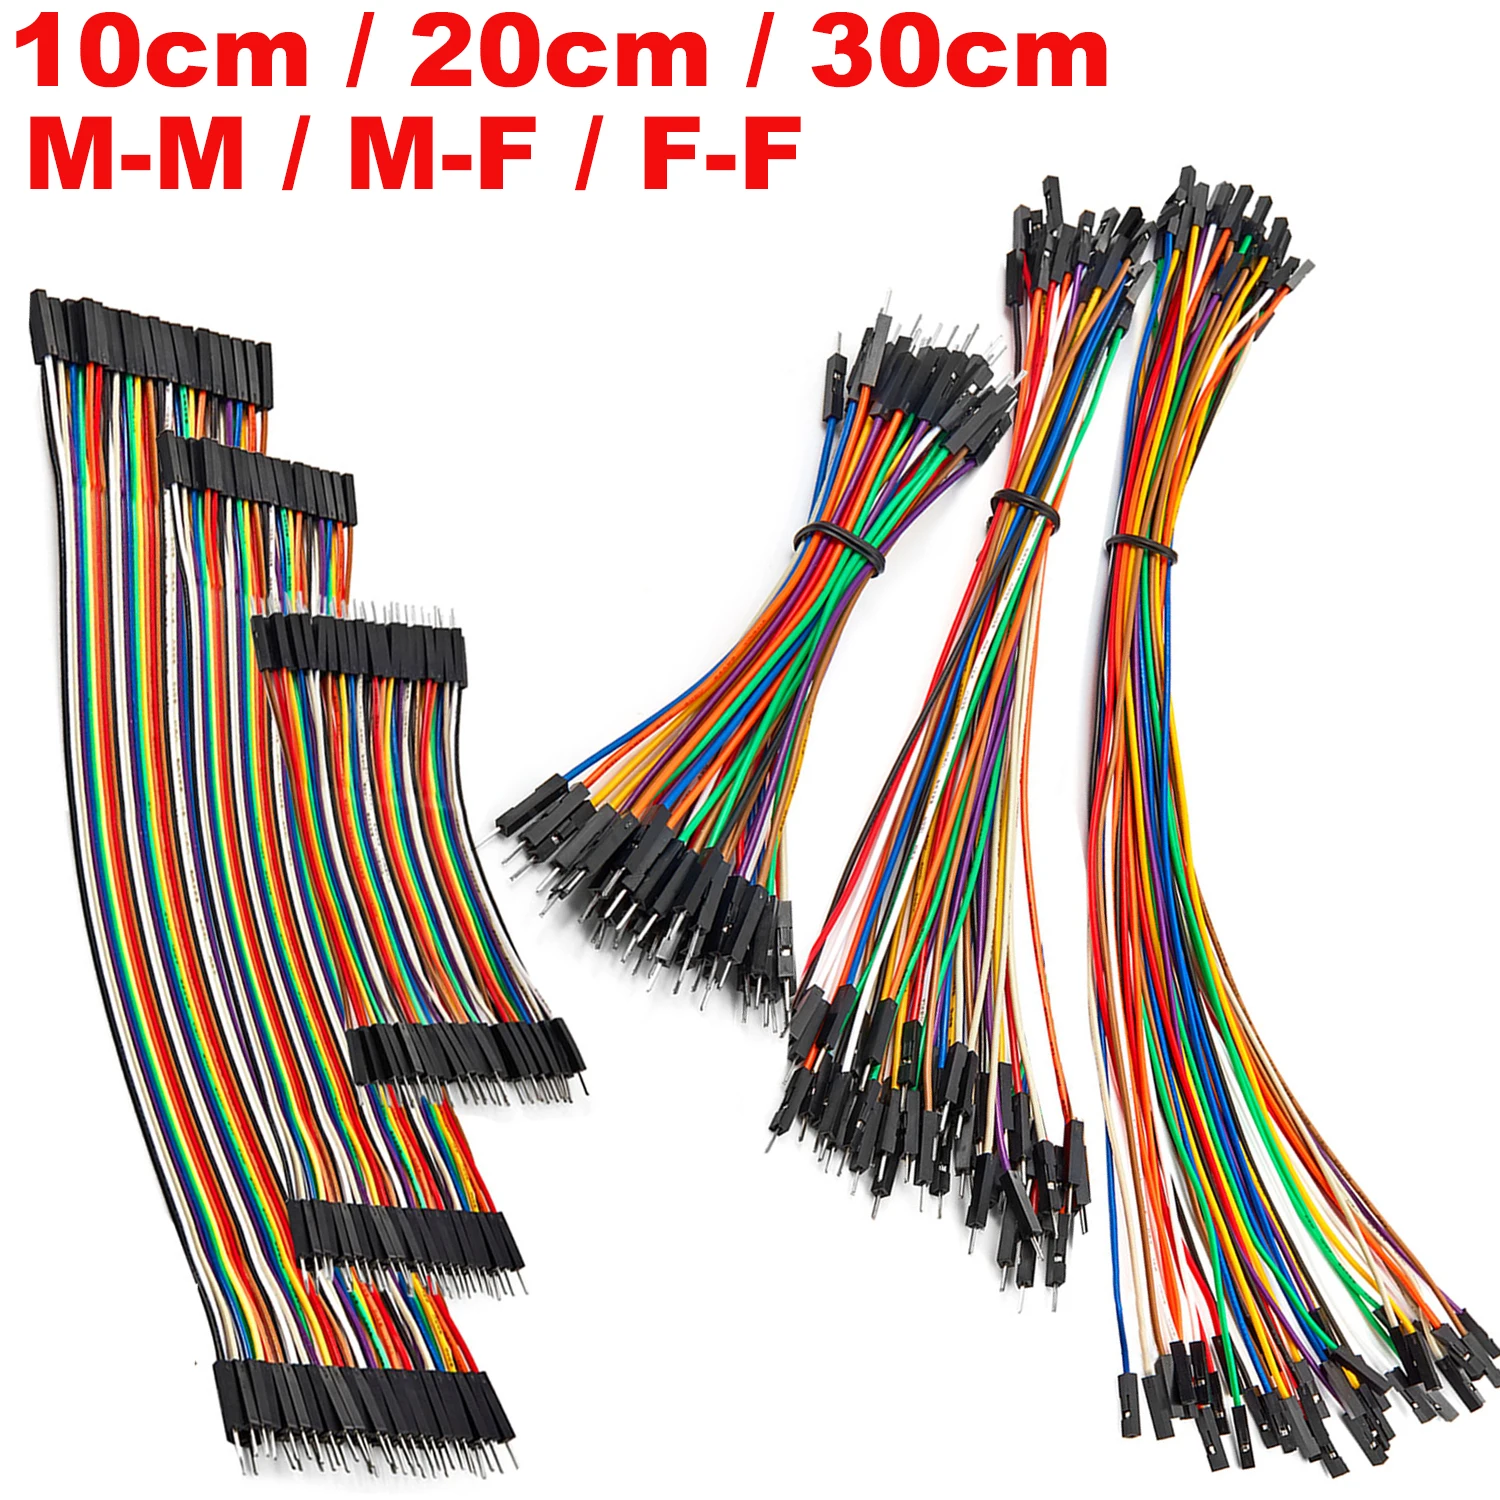 10cm 20cm 30cm 24AWG Dupont Cable Ribbon Jumper Wire Connector Kit Male Female Copper Line Set for DIY Arduino Breadboard PCB